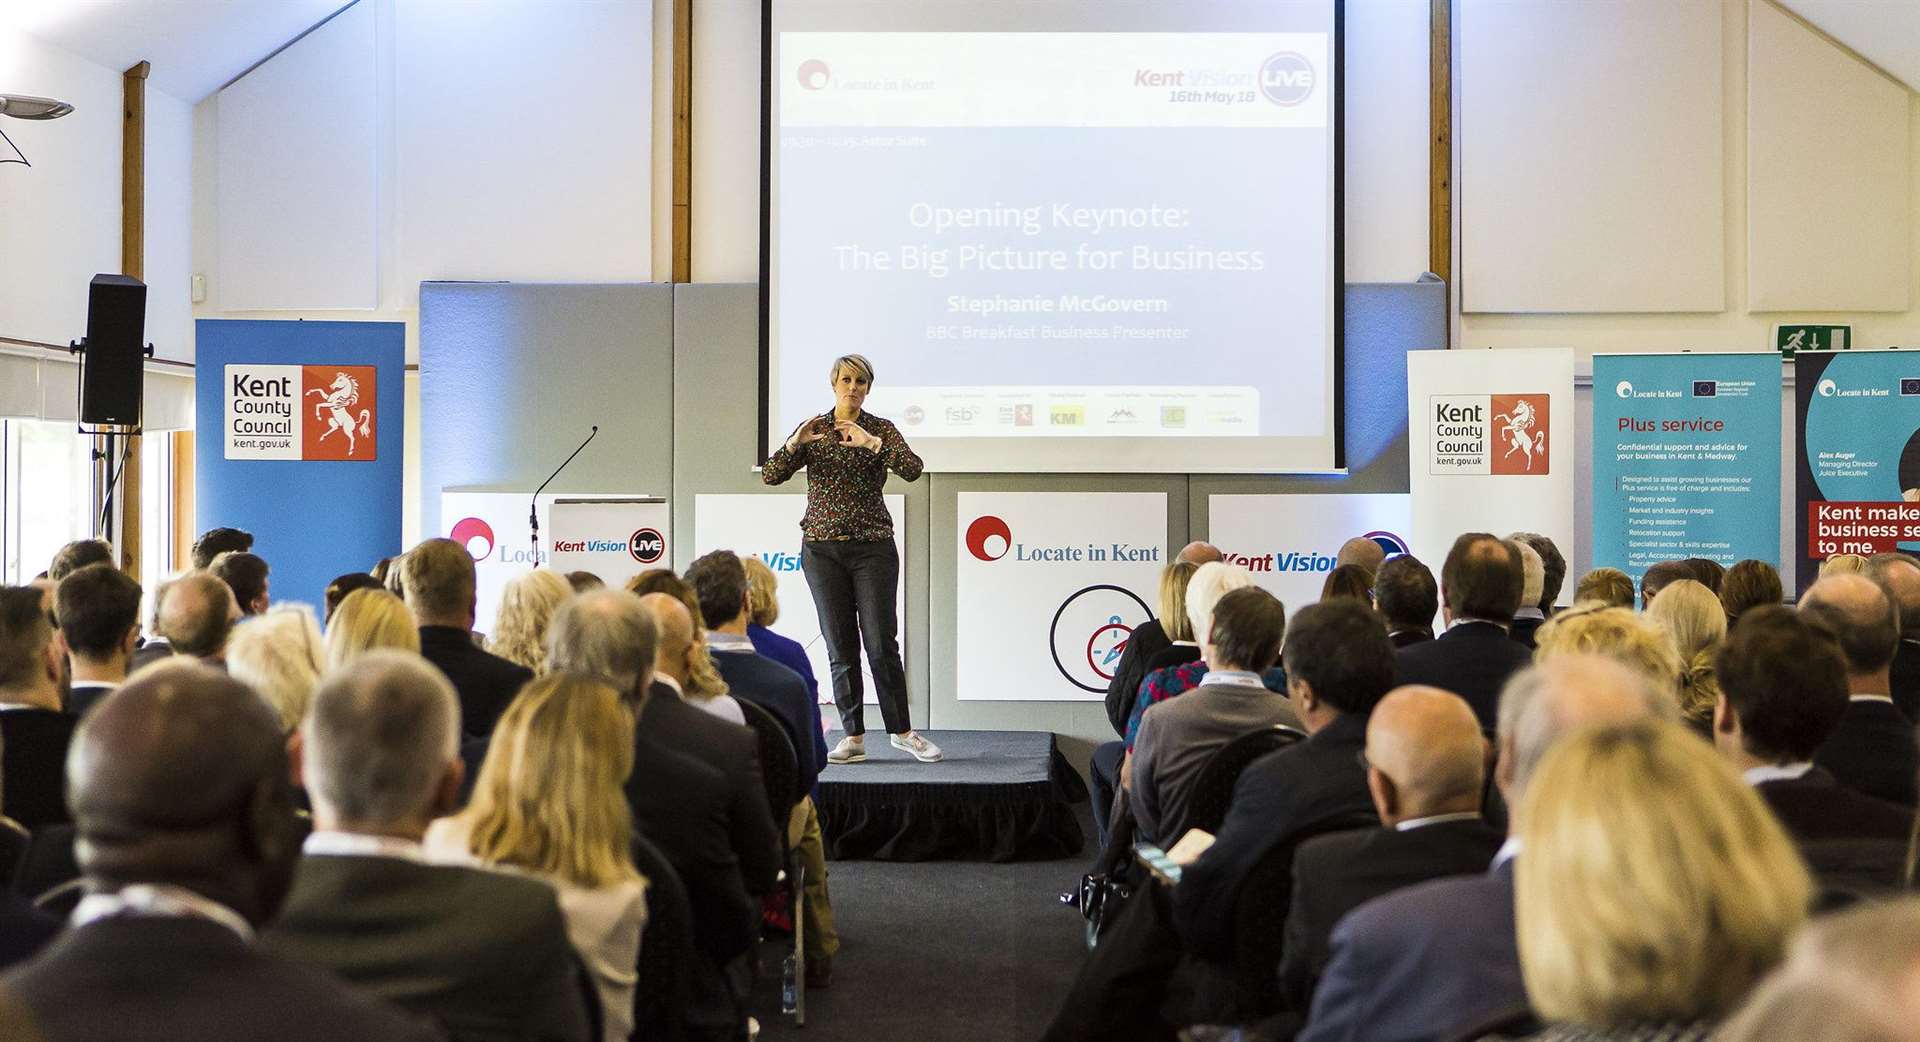 Previously known as Kent Vision LIVE, Business Vision LIVE is in its 15th year and continues to be the largest gathering of business professionals in the South East.